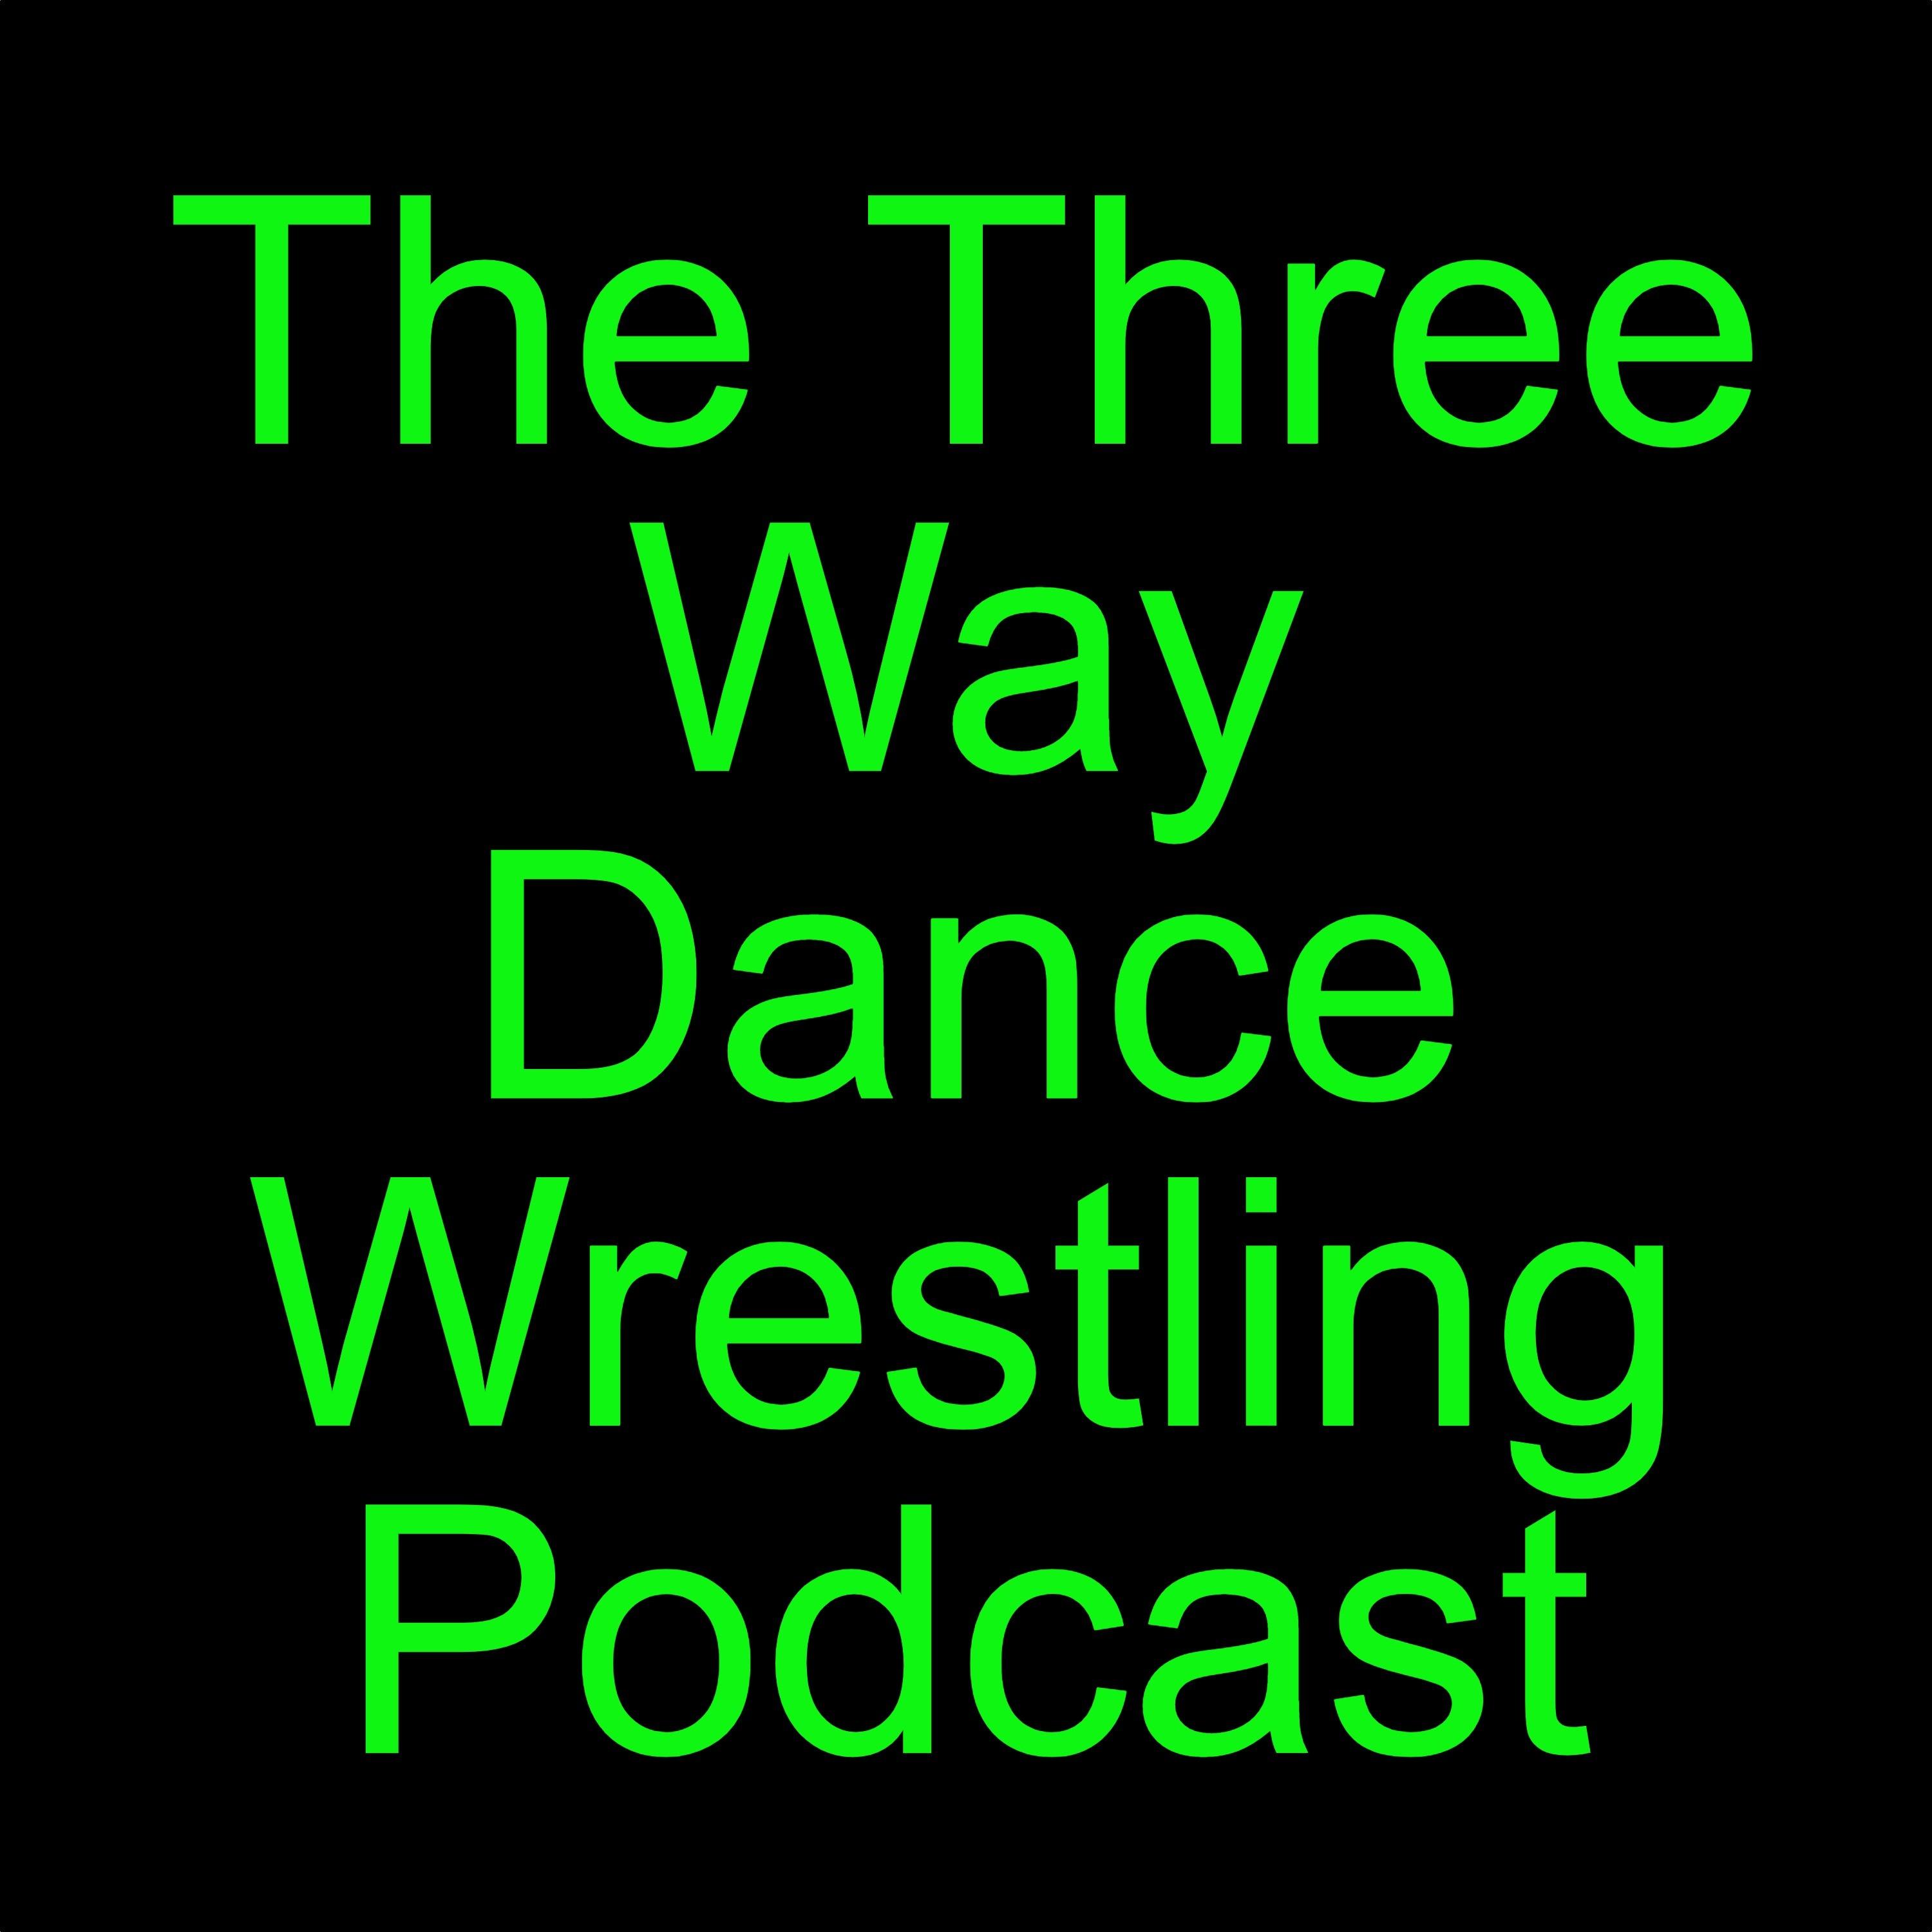 The Three Way Dance Wrestling Podcast